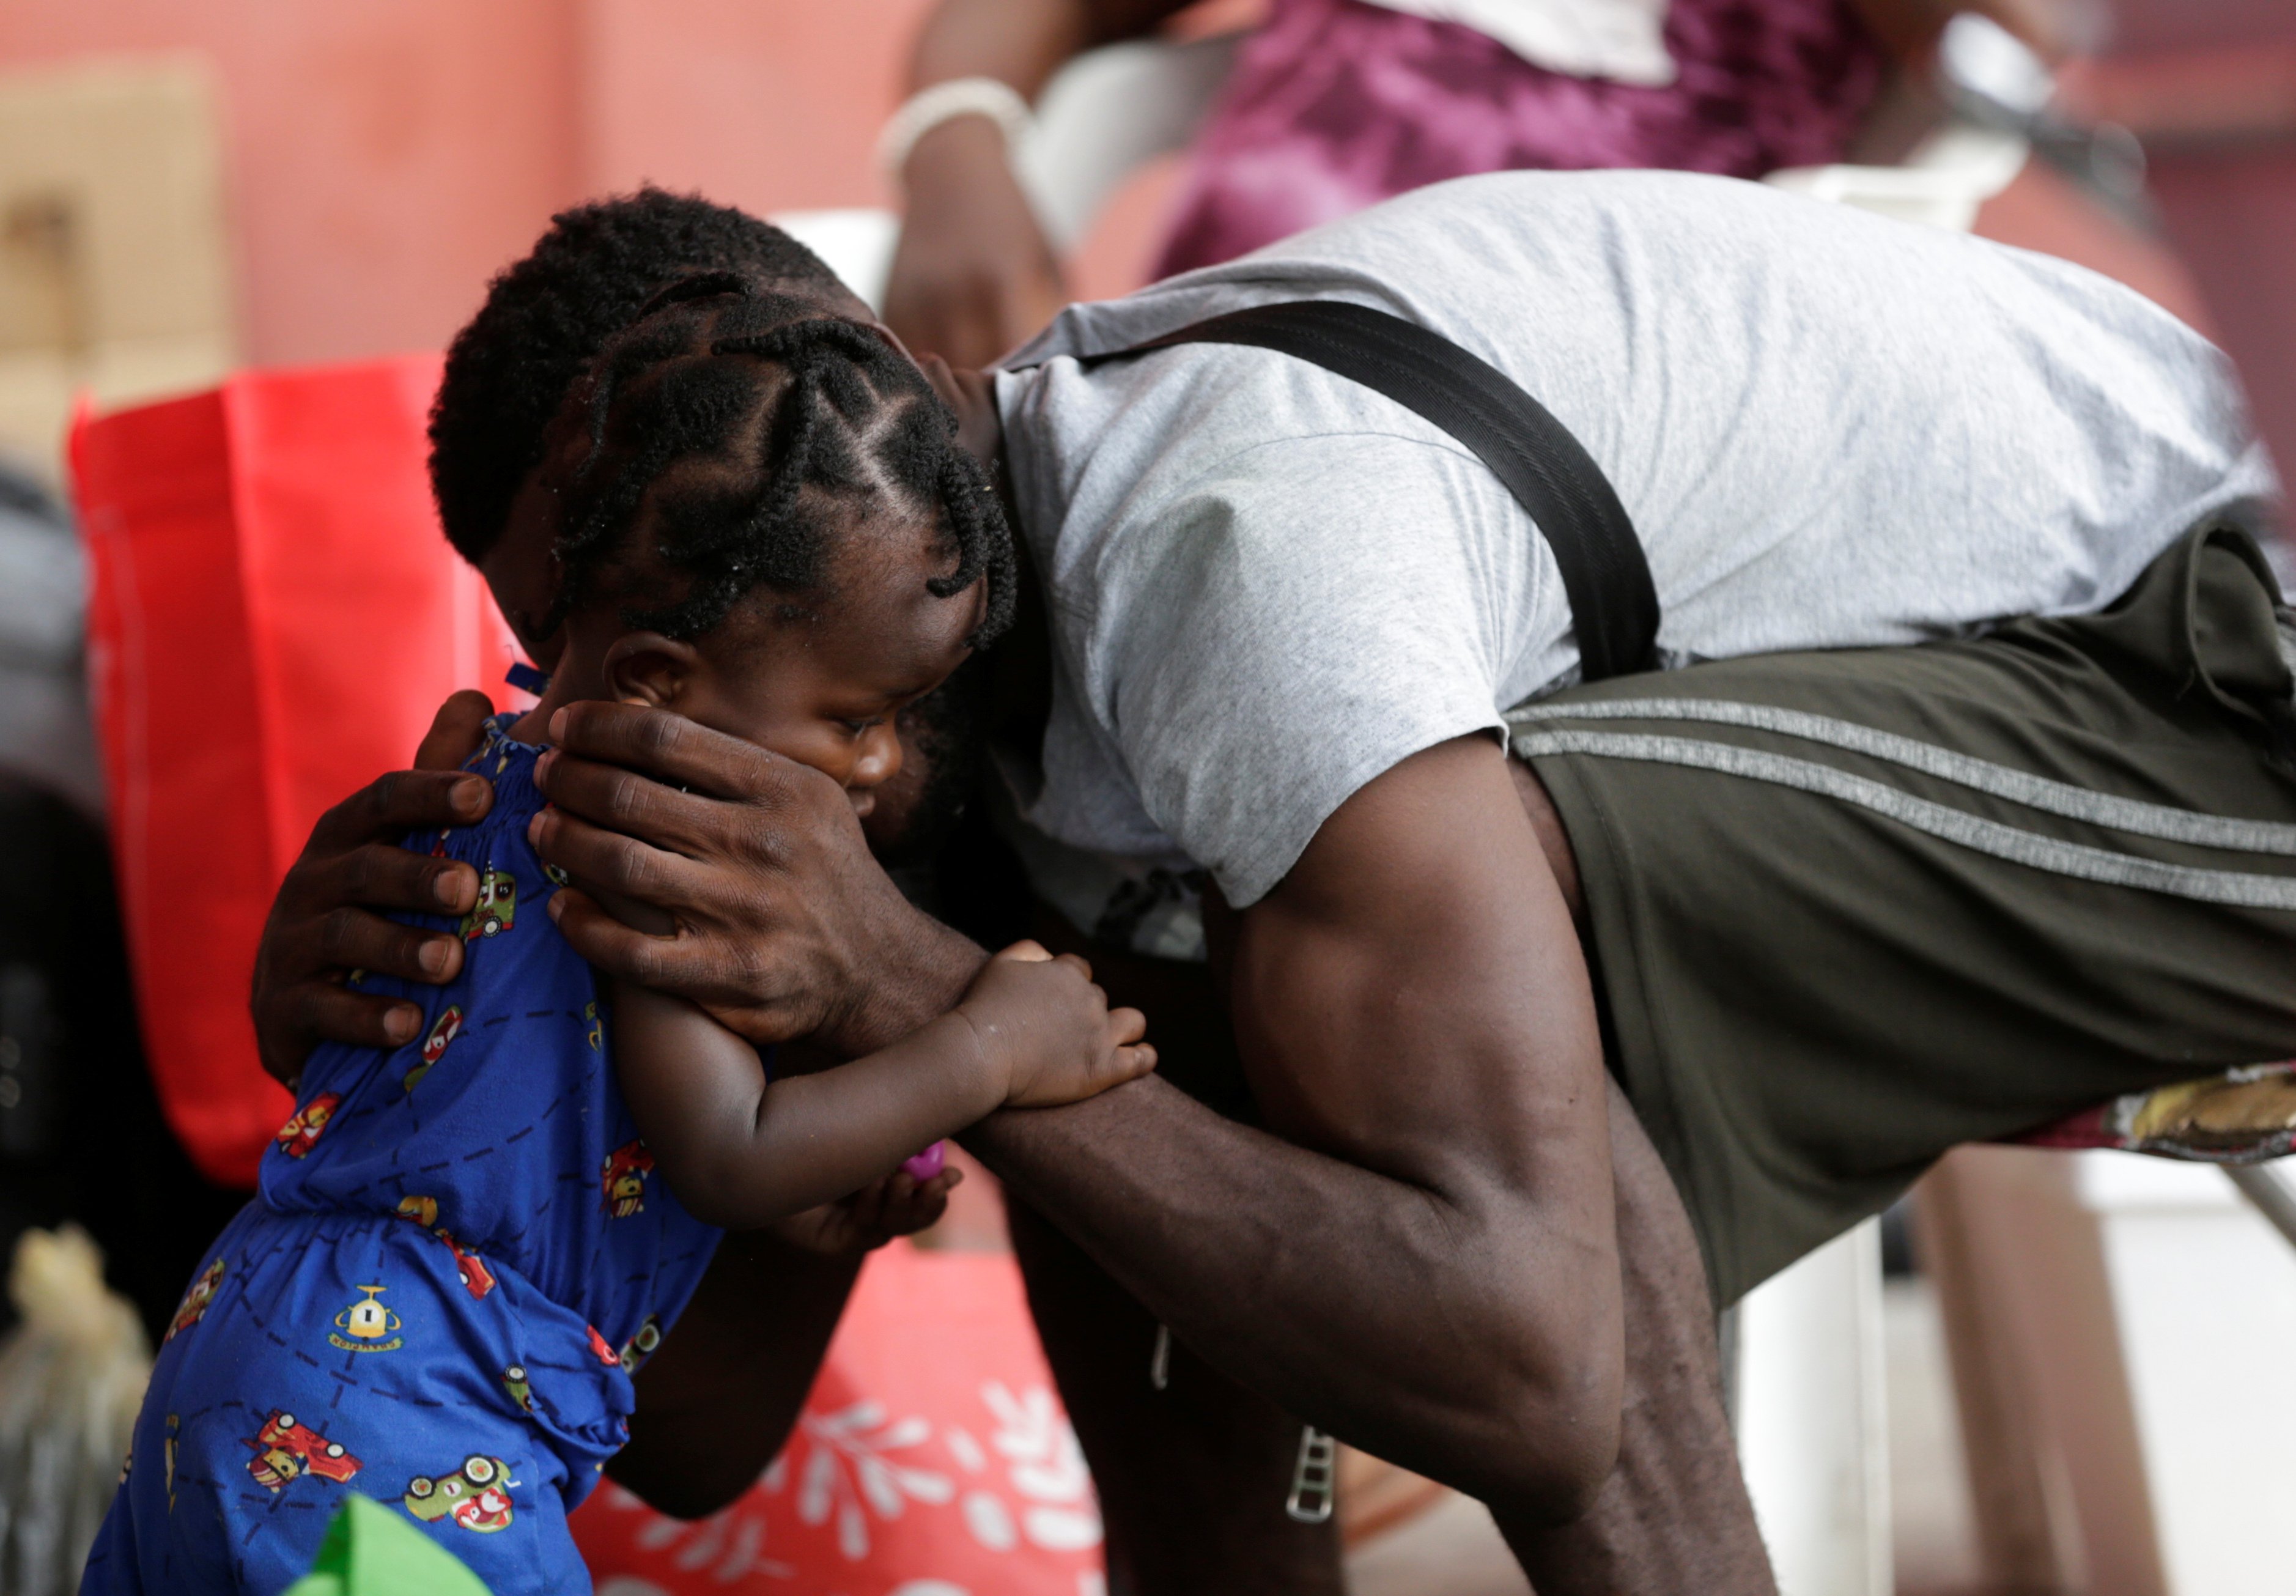 A Haitian migrant seeking refuge in the U.S., hugs his daughter outside a shelter in Monterrey, Mexico, Sept. 28, 2021. (CNS photo/Daniel Becerril, Reuters)